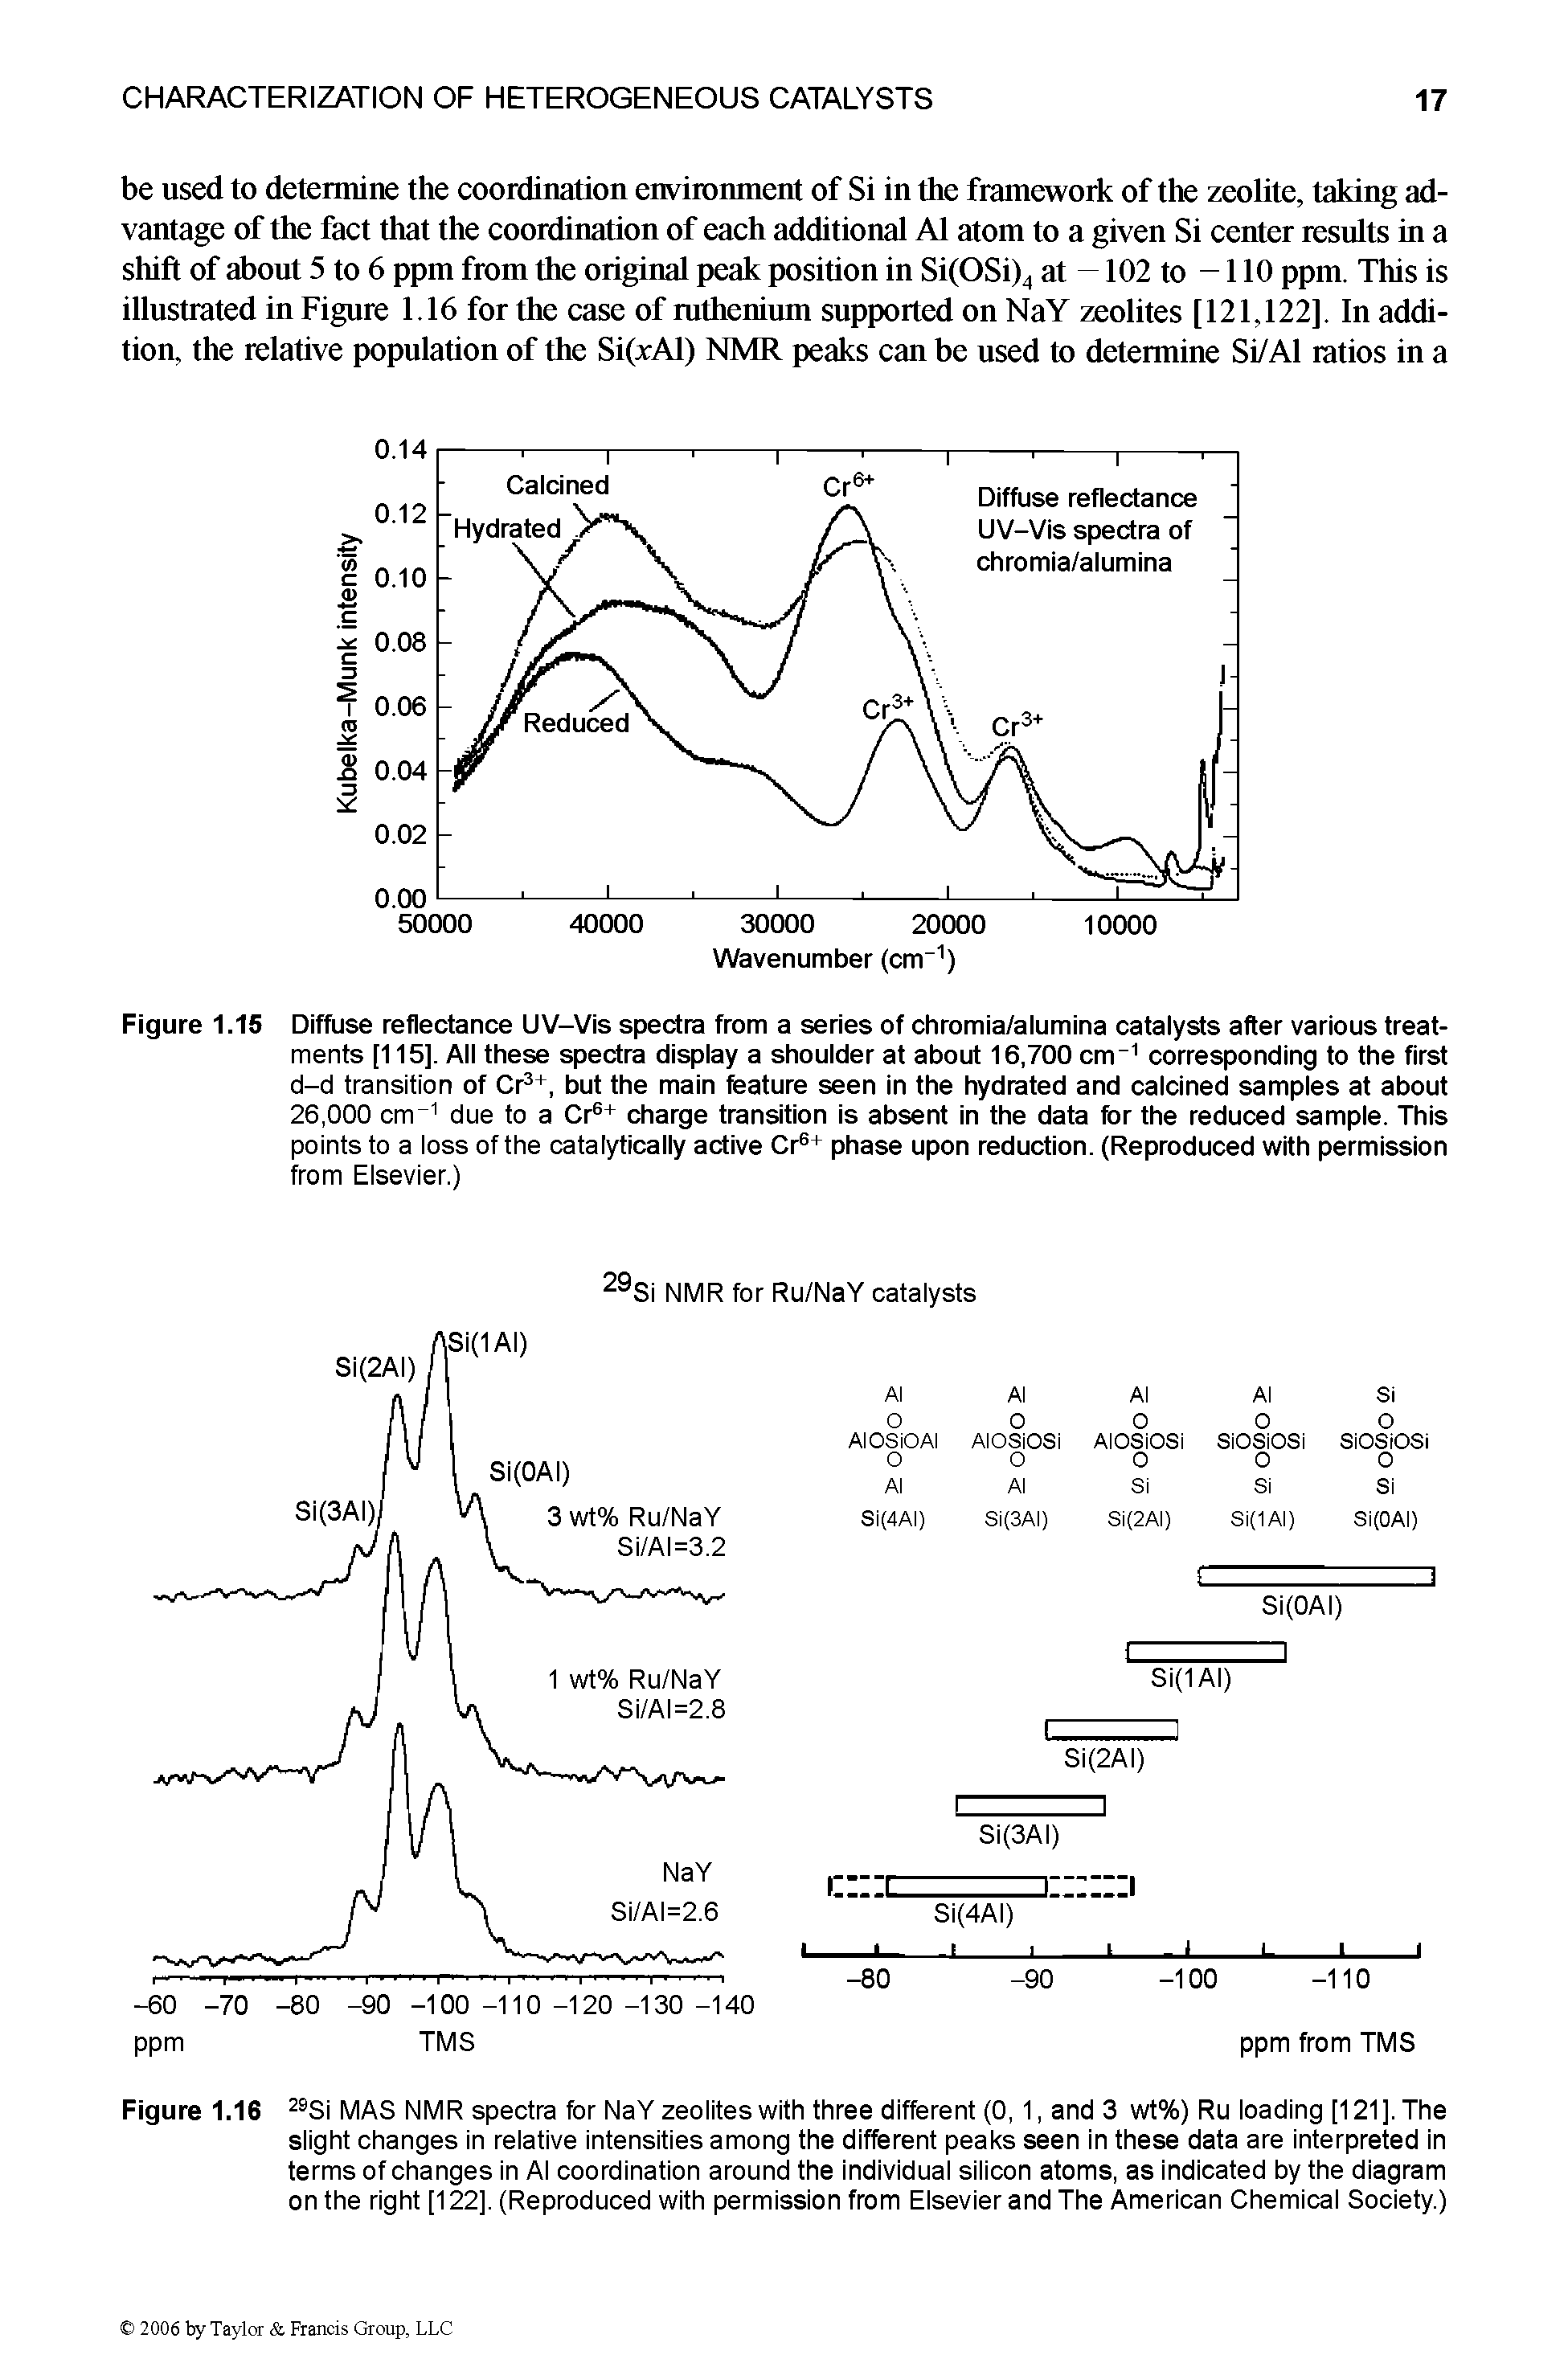 Figure 1.16 29Si MAS NMR spectra for NaY zeolites with three different (0, 1, and 3 wt%) Ru loading [121], The slight changes in relative intensities among the different peaks seen in these data are interpreted in terms of changes in Al coordination around the individual silicon atoms, as indicated by the diagram on the right [122], (Reproduced with permission from Elsevier and The American Chemical Society.)...